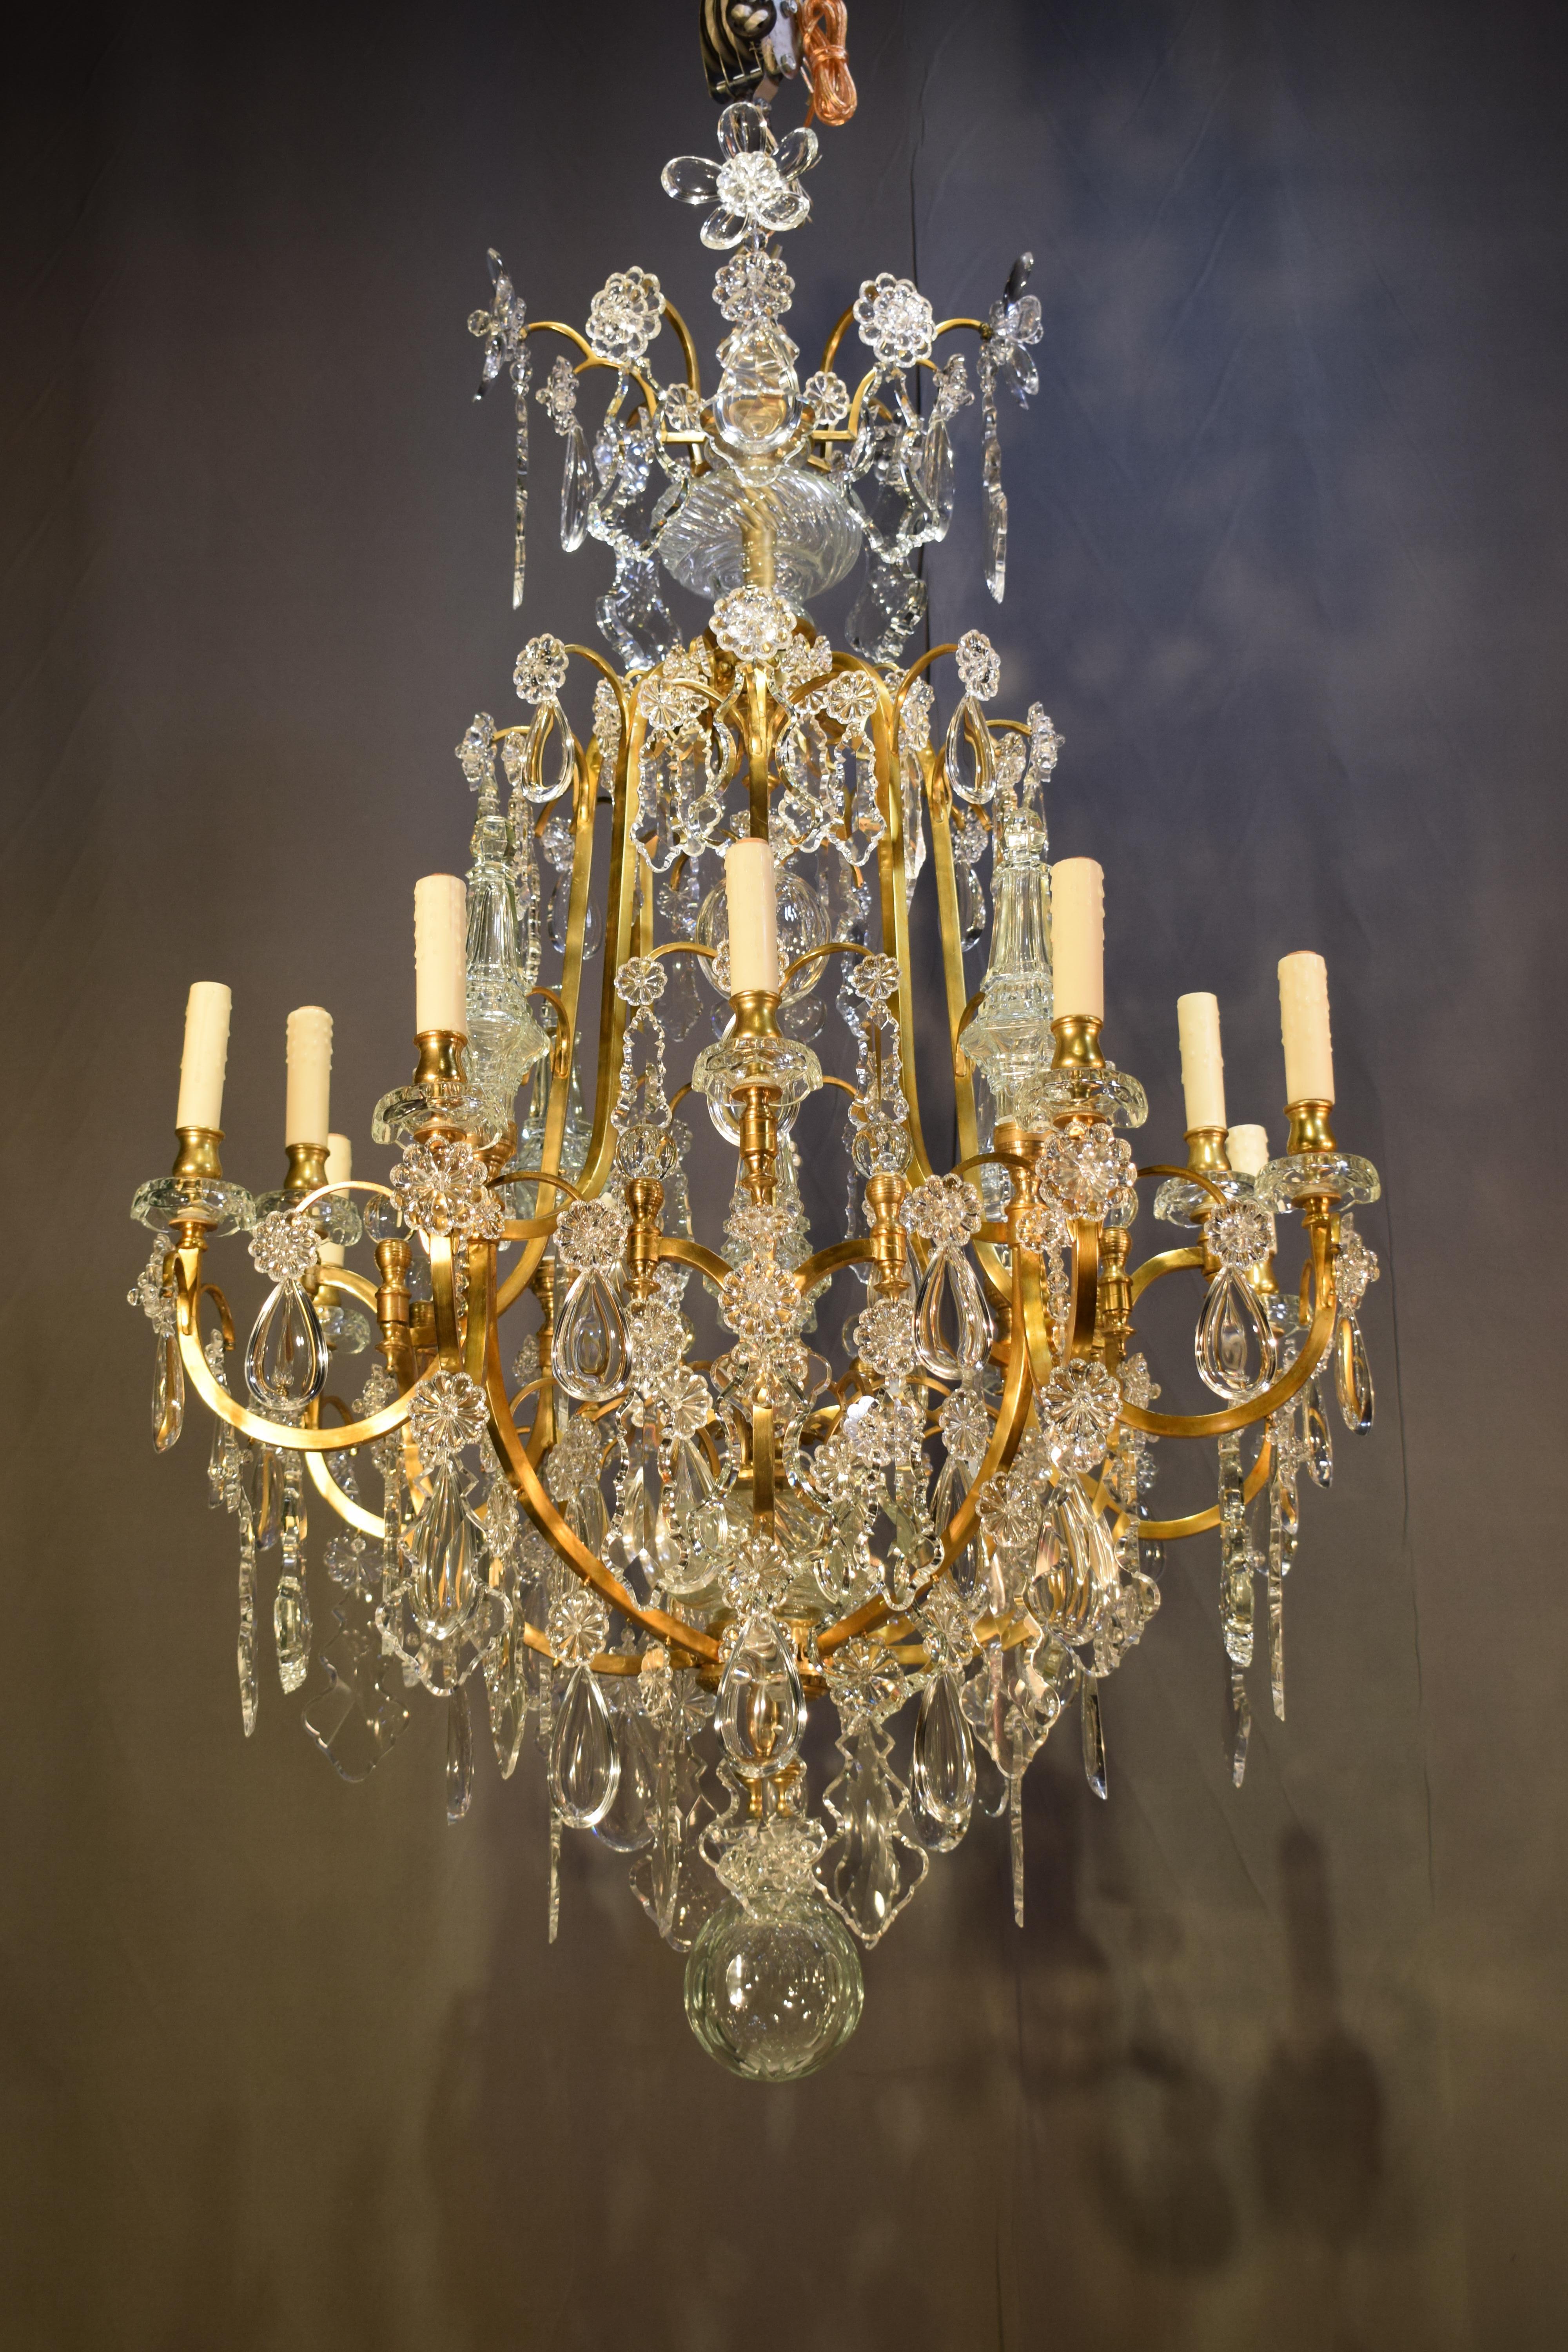 A very fine gilt bronze and crystal chandelier. In the Louis XV style. By Baccarat, circa 1910. 12 Lights.
Dimensions: Height 53